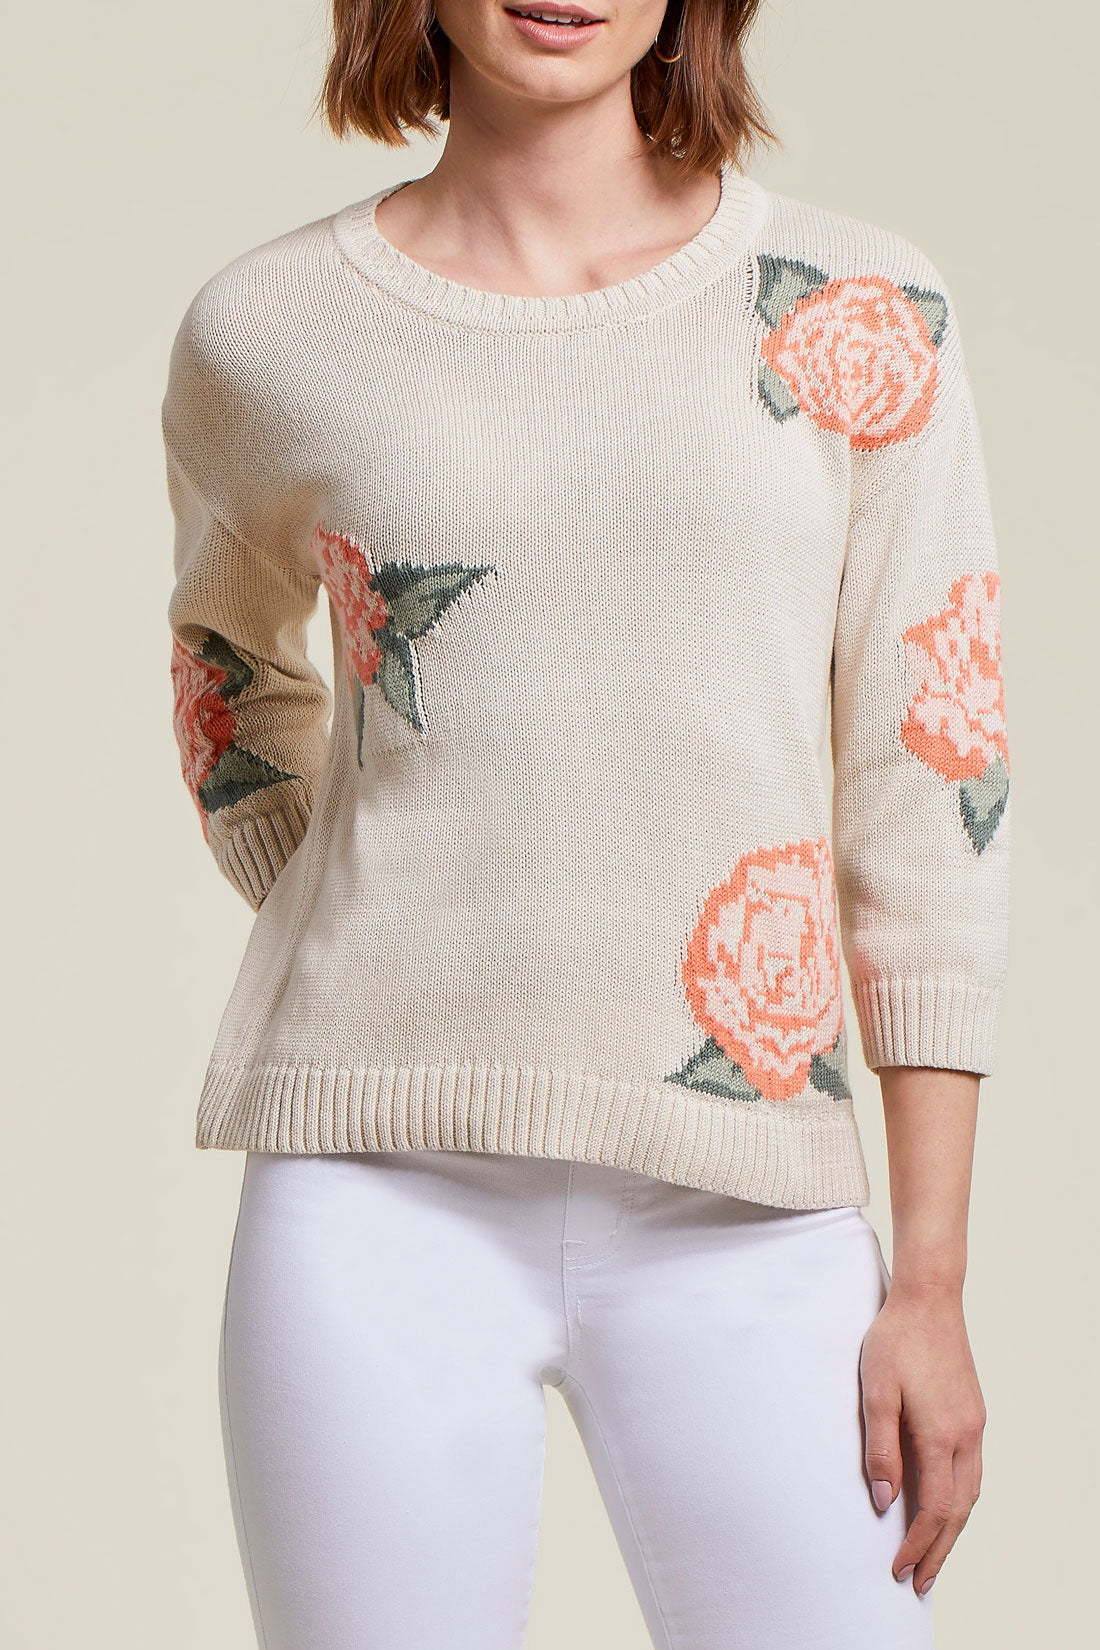 Flax Sweater with Floral Detail by Tribal